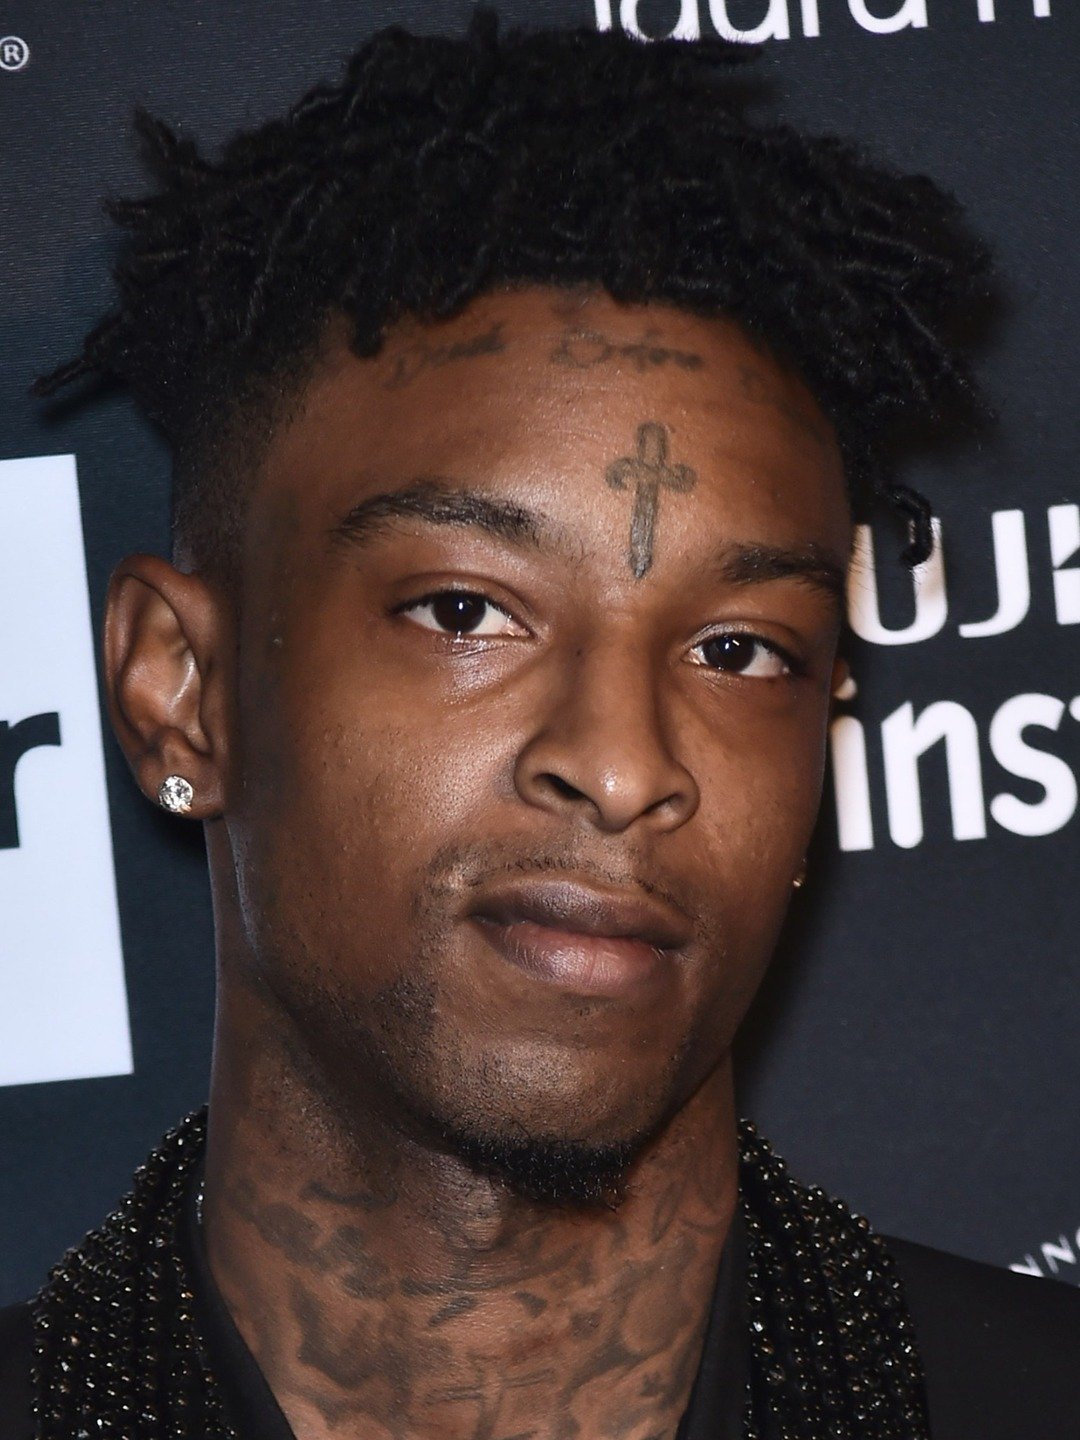 How tall is 21 Savage?